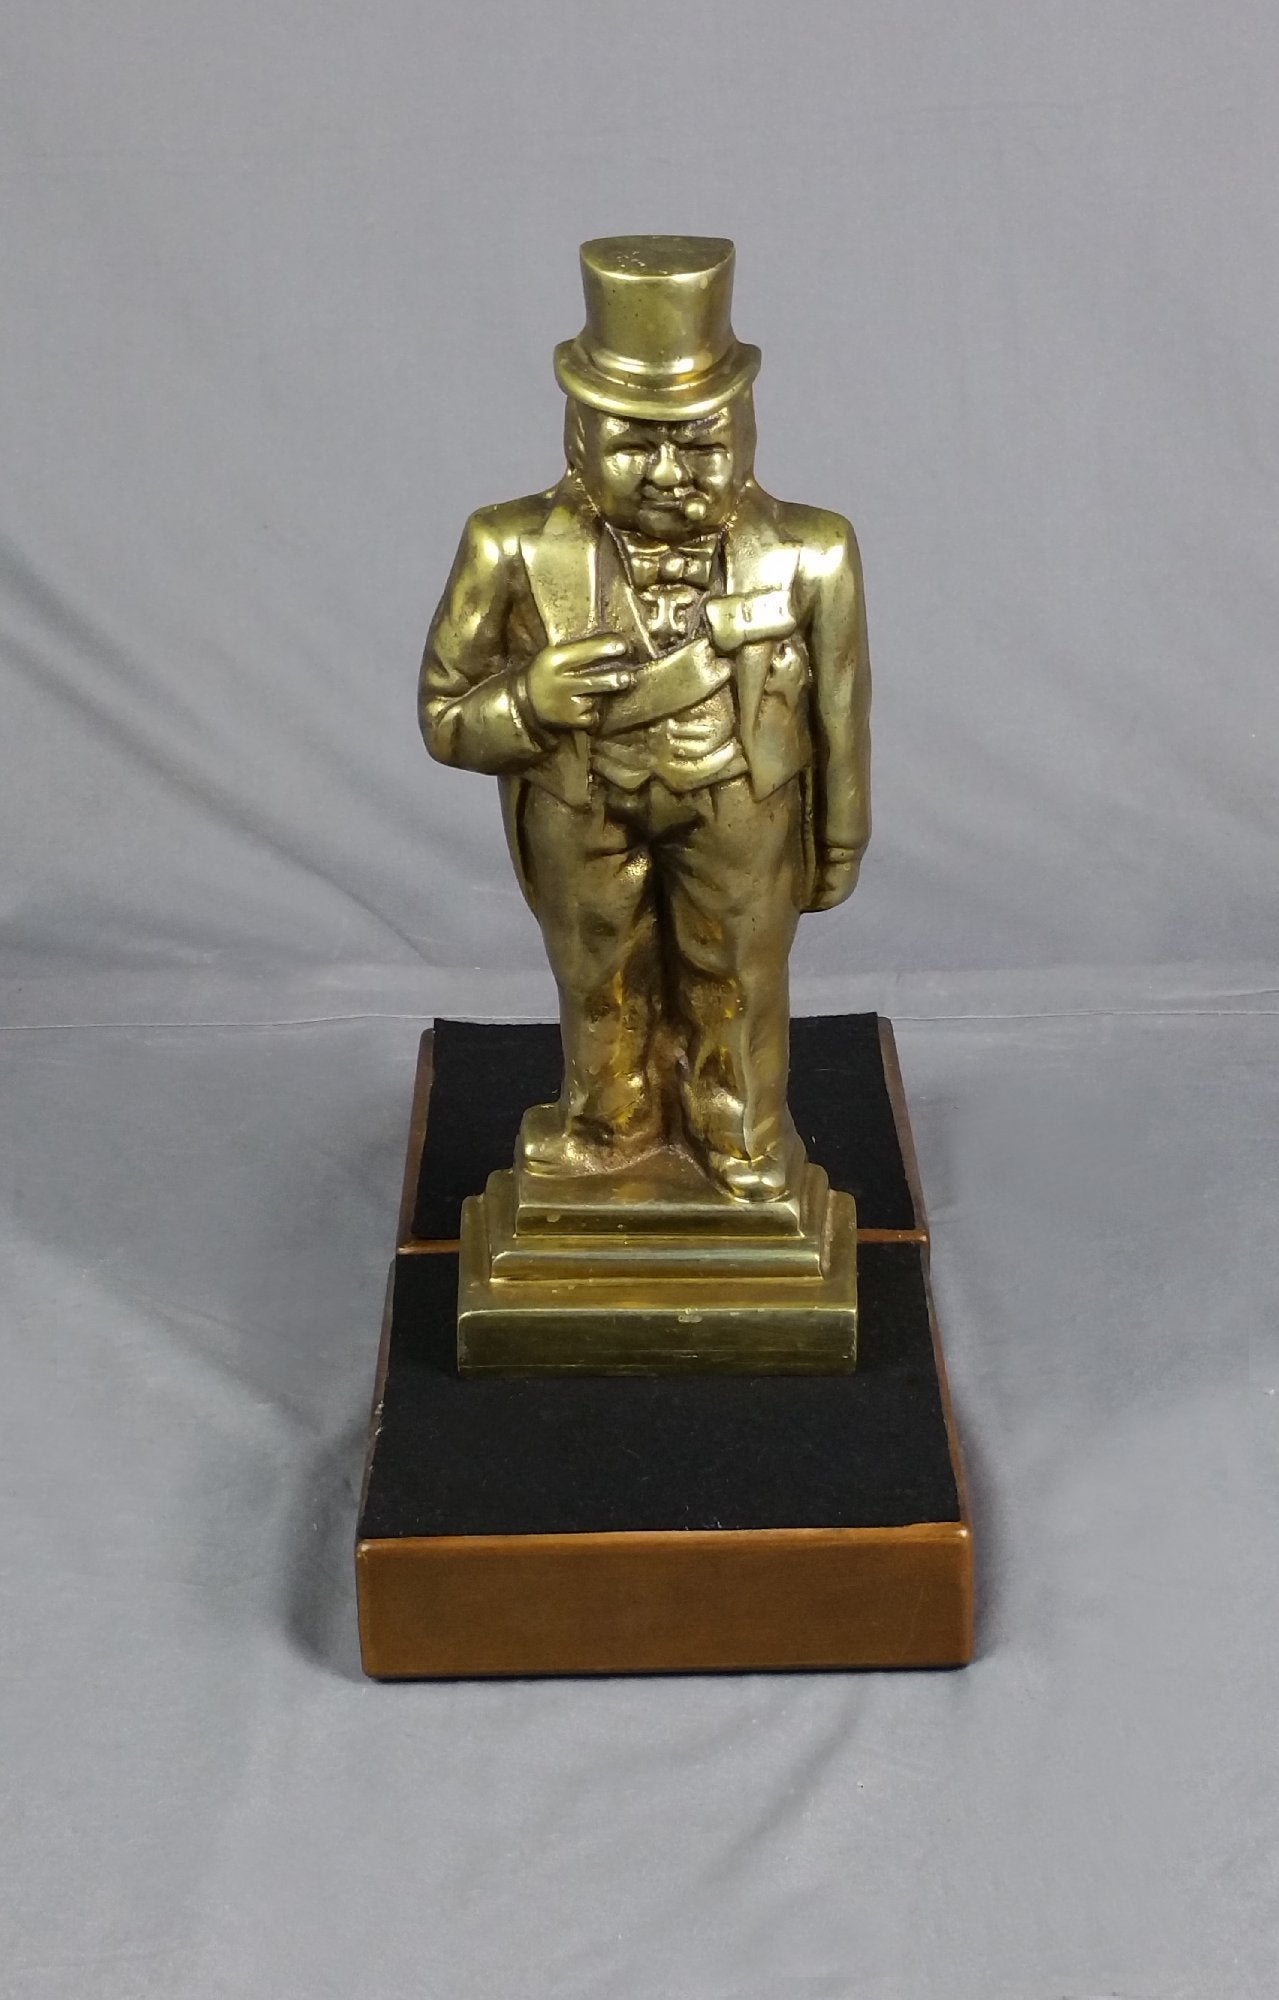 This detailed mid-20th century English brass doorstop was designed in the image of Winston Churchill. A nicely weighted piece, he stands 14 ½ inch – 37 cm high, with a depth of 3 inch – 7.5 cm and width of 6 inch – 15.2 cm.